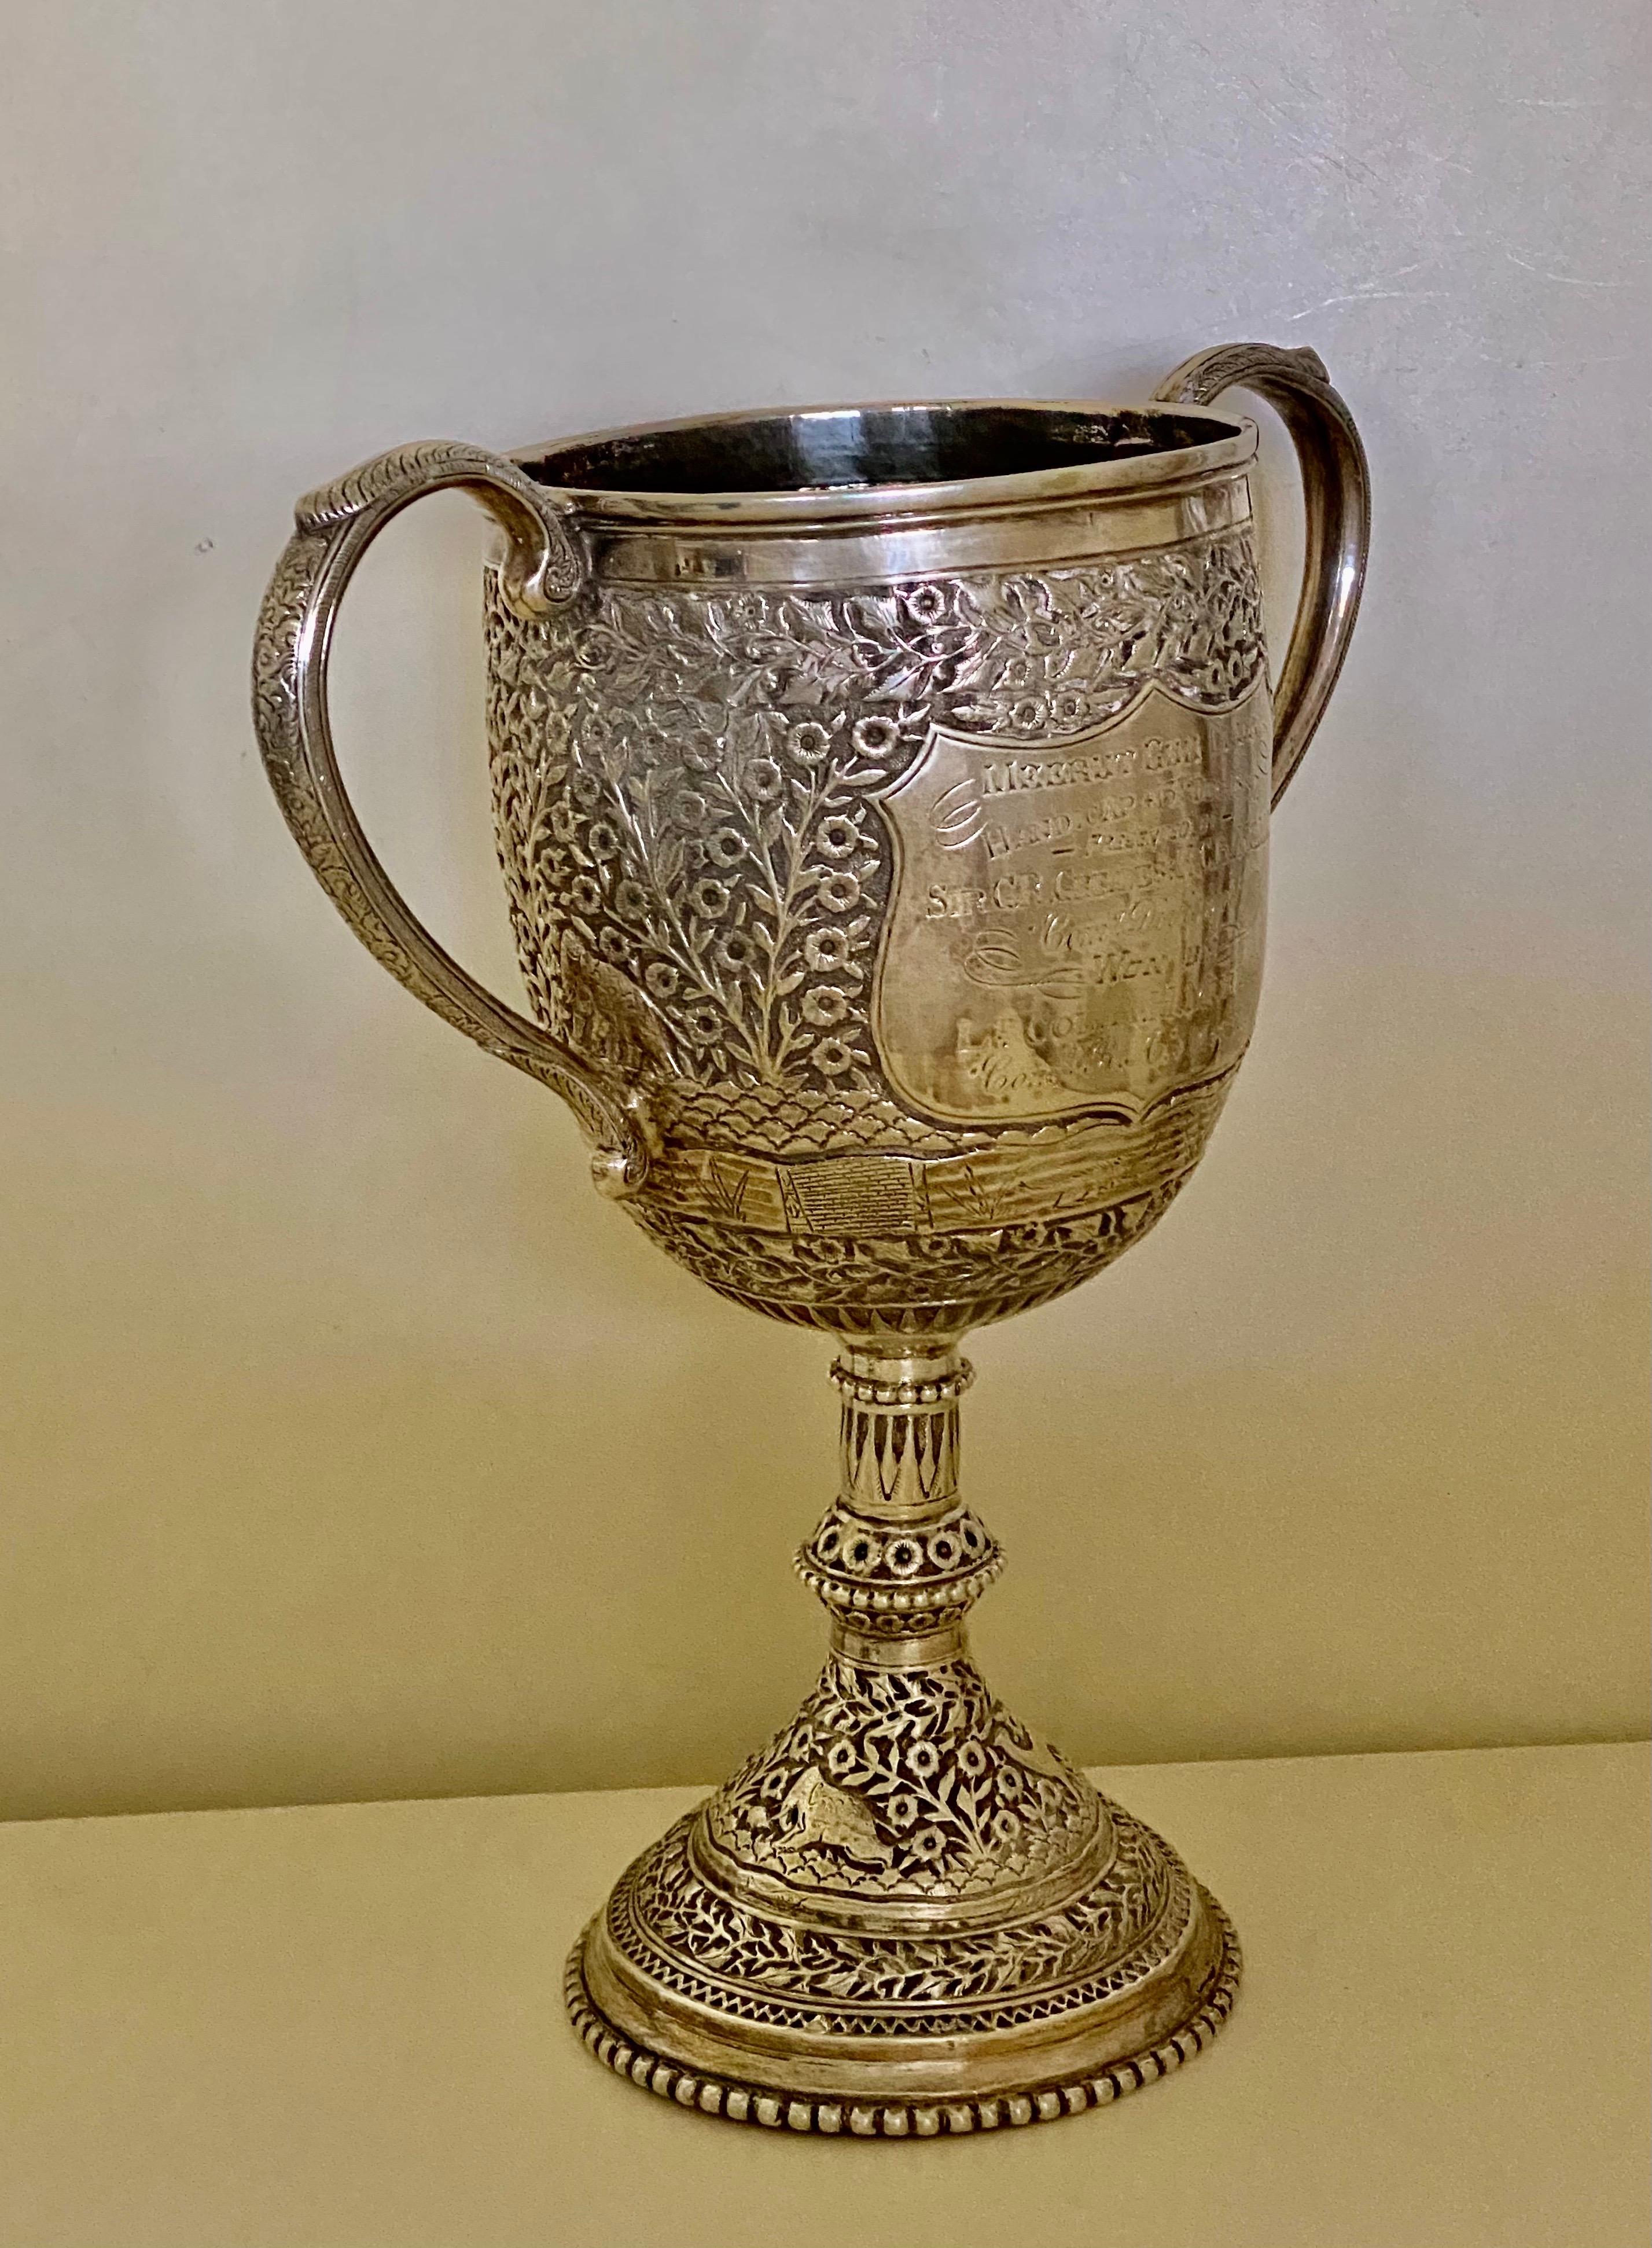 A large antique 19th century Indian Silver Kutch trophy cup with twin cast handles, the body is profusely chased with the typical repousse' foliage, also depicting flowers and animals, very crisp and detailed A shield on the front side. The silver